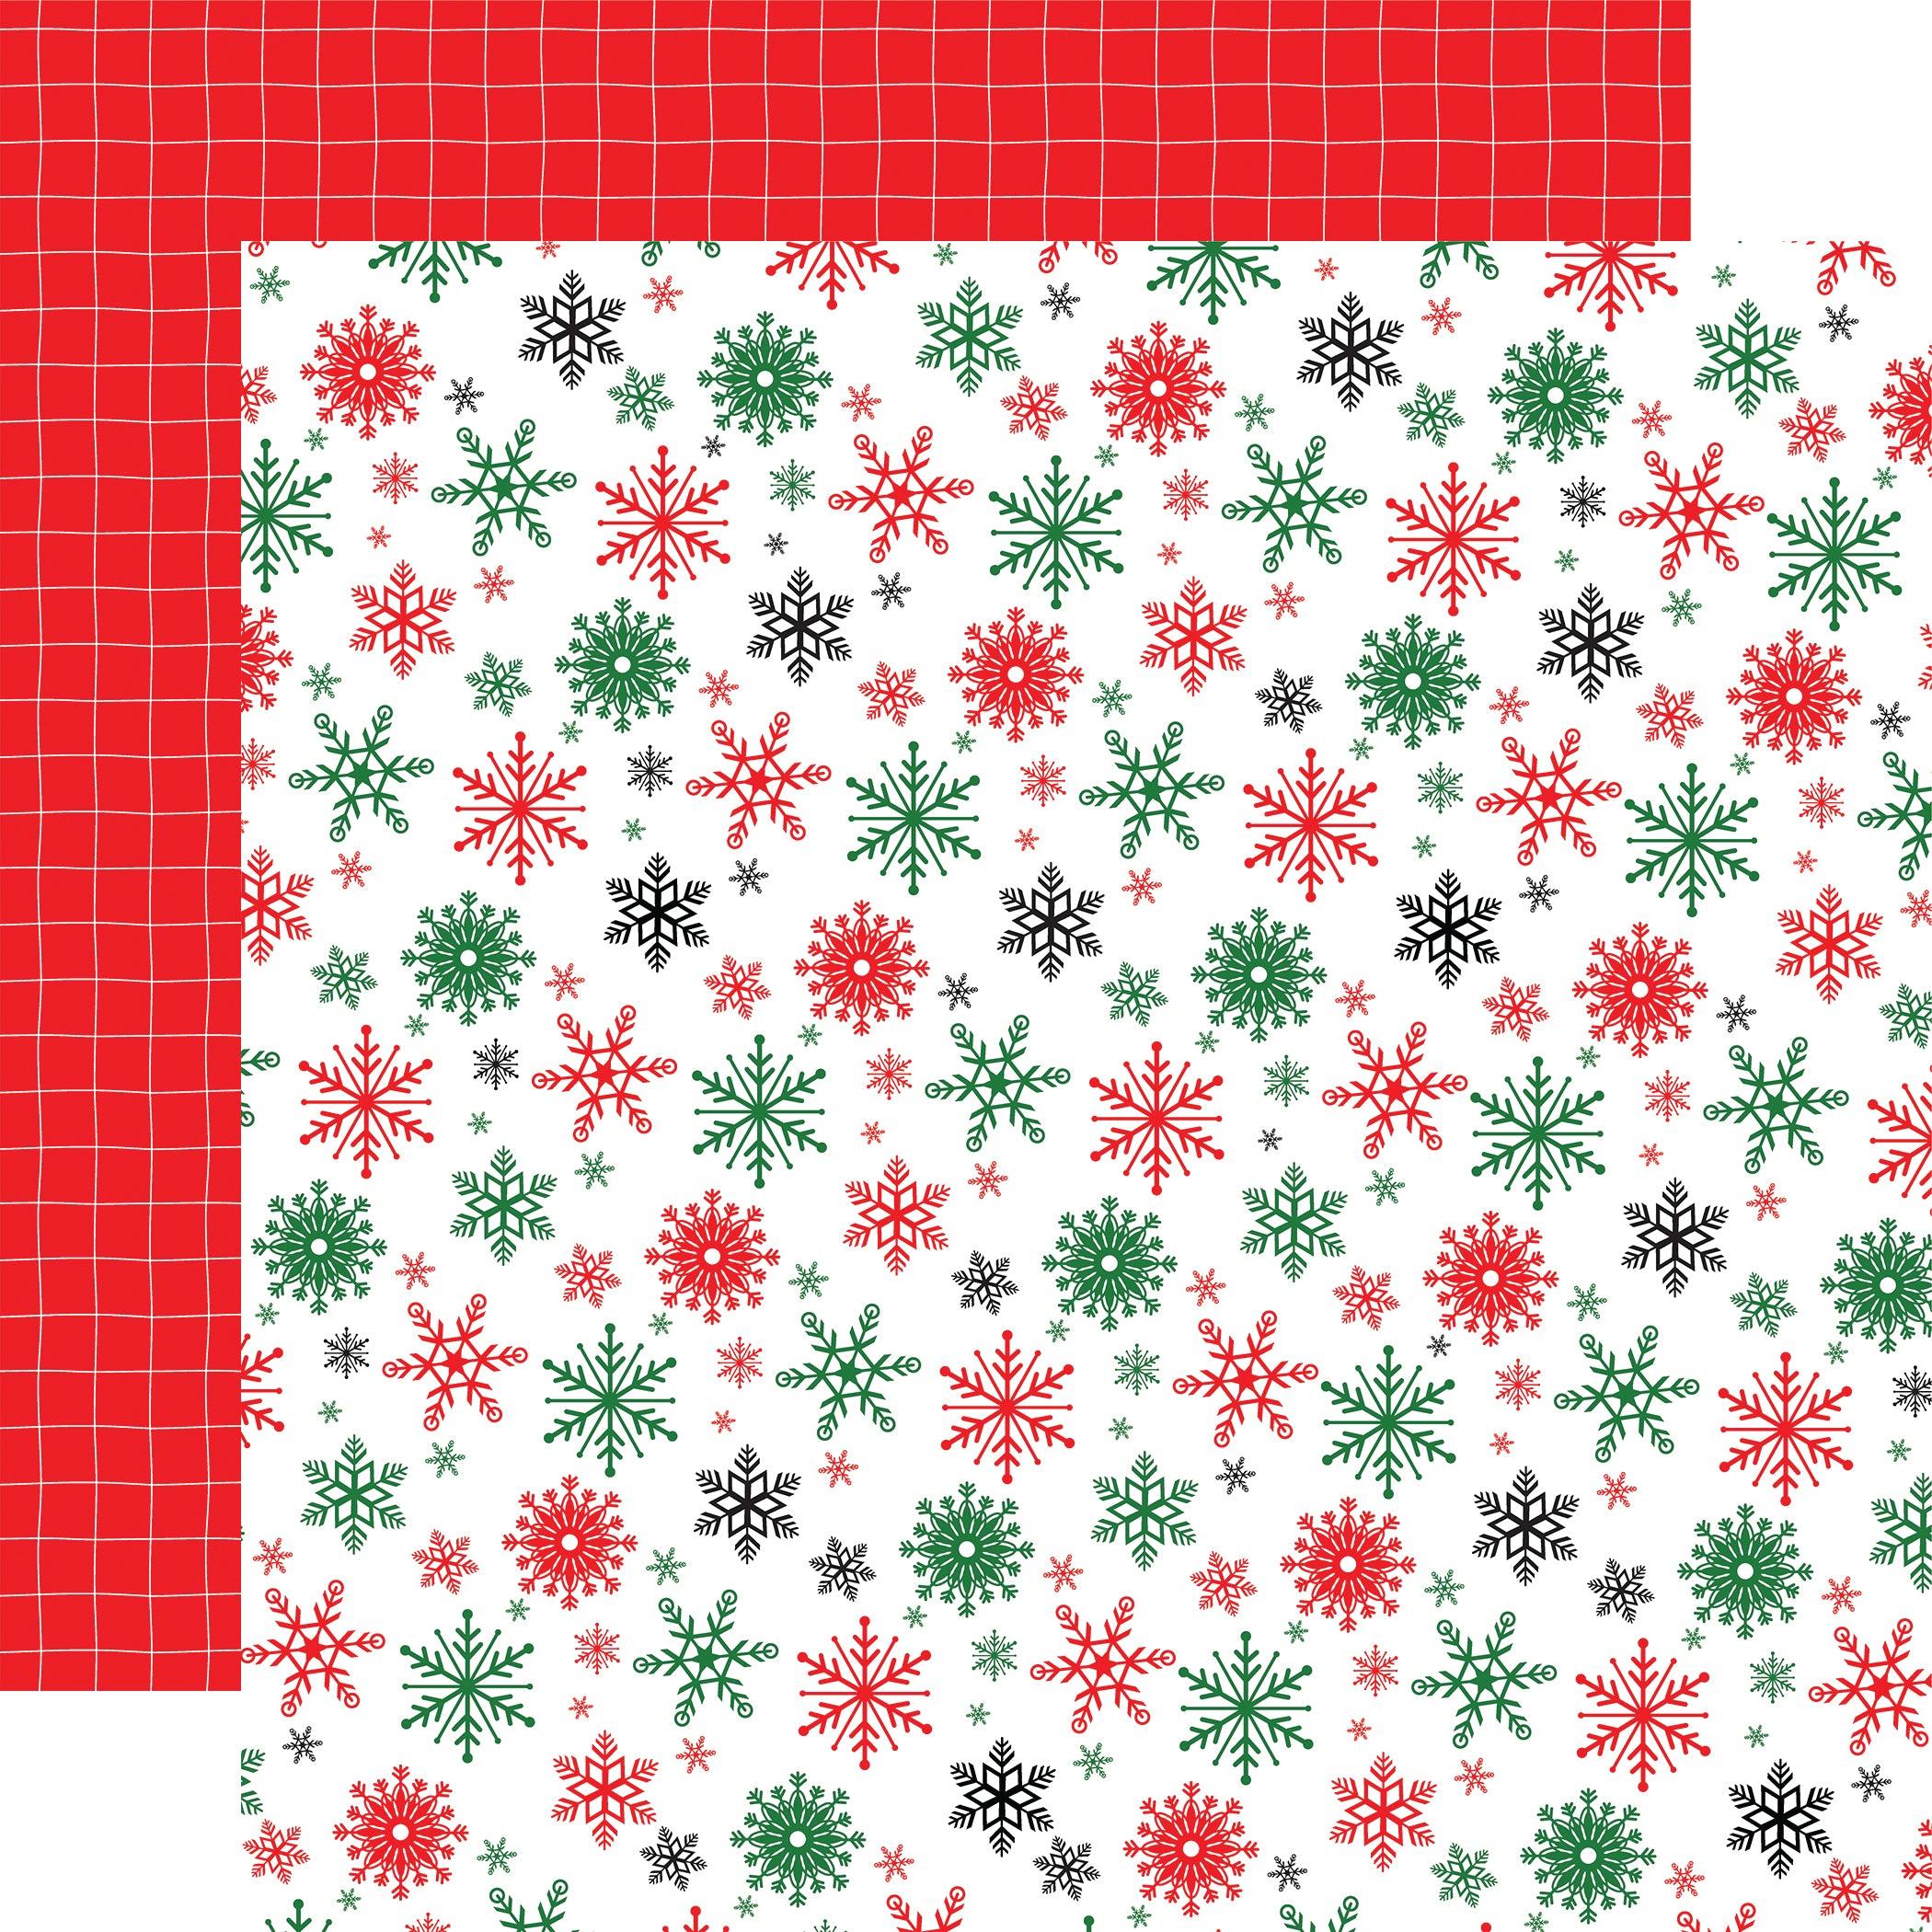 Christmas Cheer Collection 12 x 12 Double-Sided Scrapbook Paper Kit & Sticker Sheet by Carta Bella - 13 Pieces - Scrapbook Supply Companies